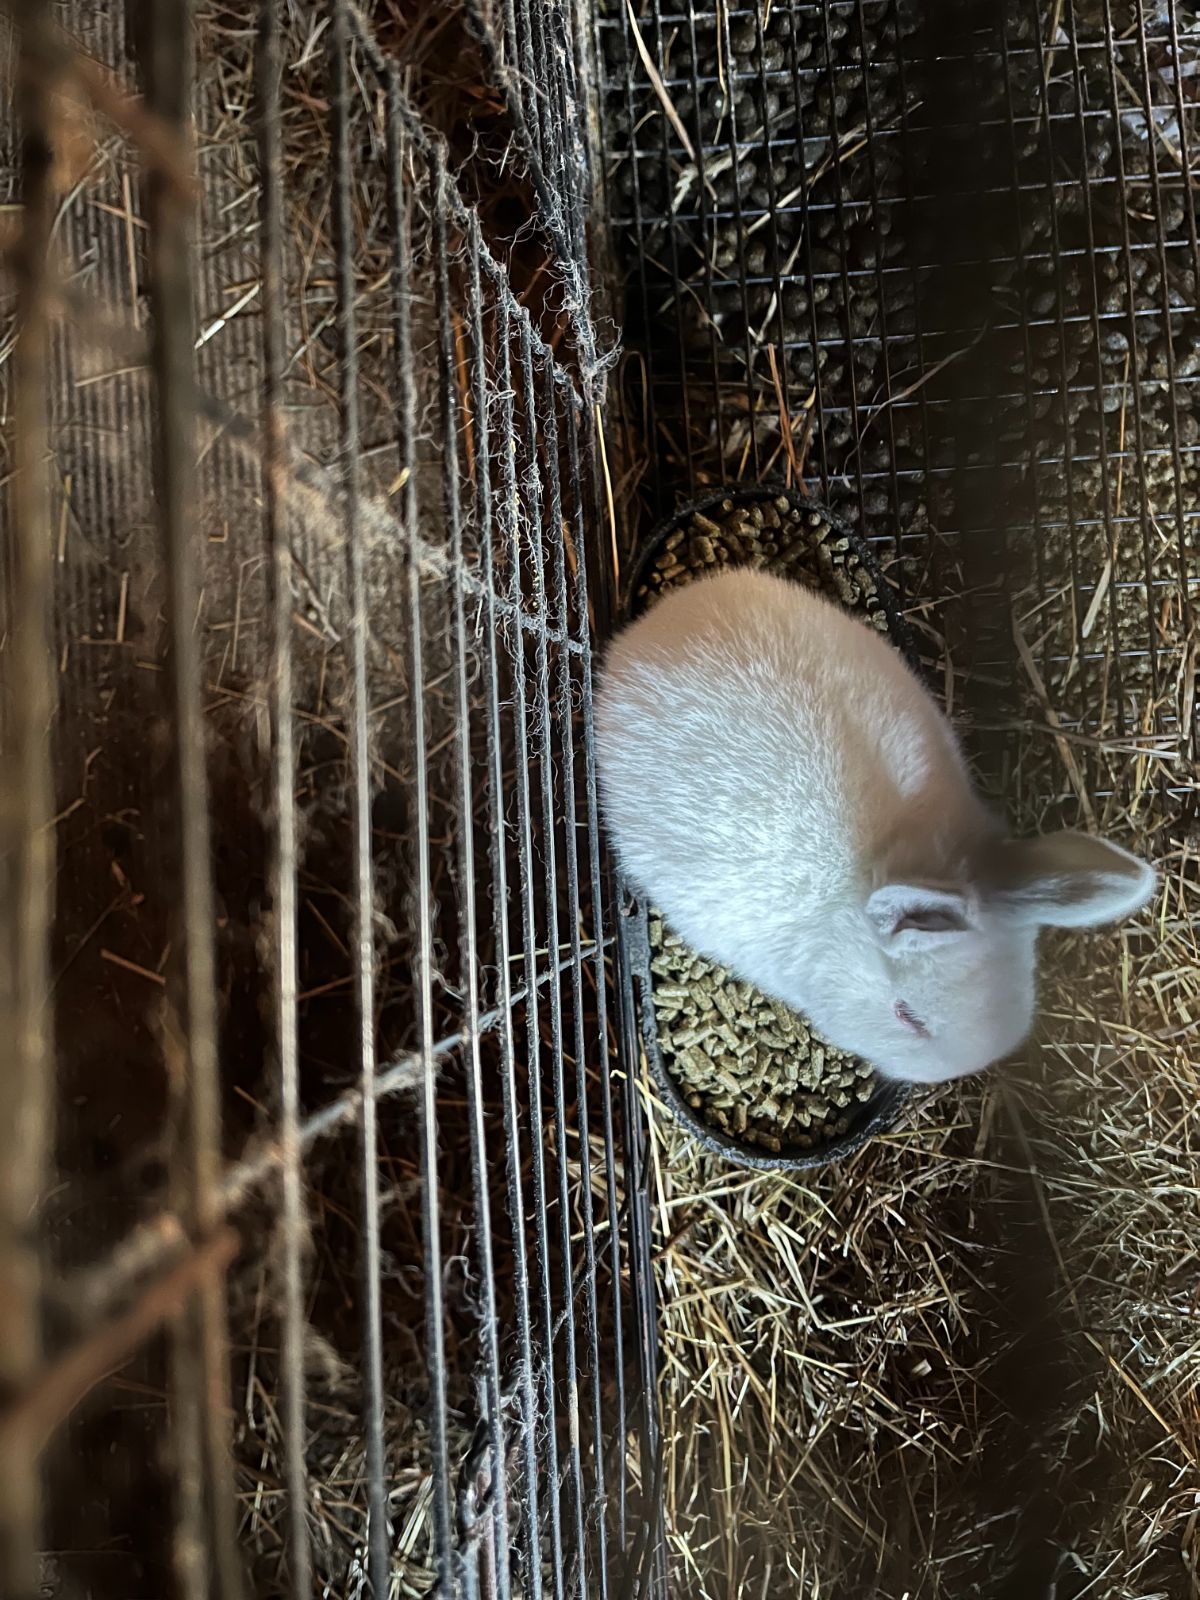 A 3 week old meat rabbit sitting in a feed dish